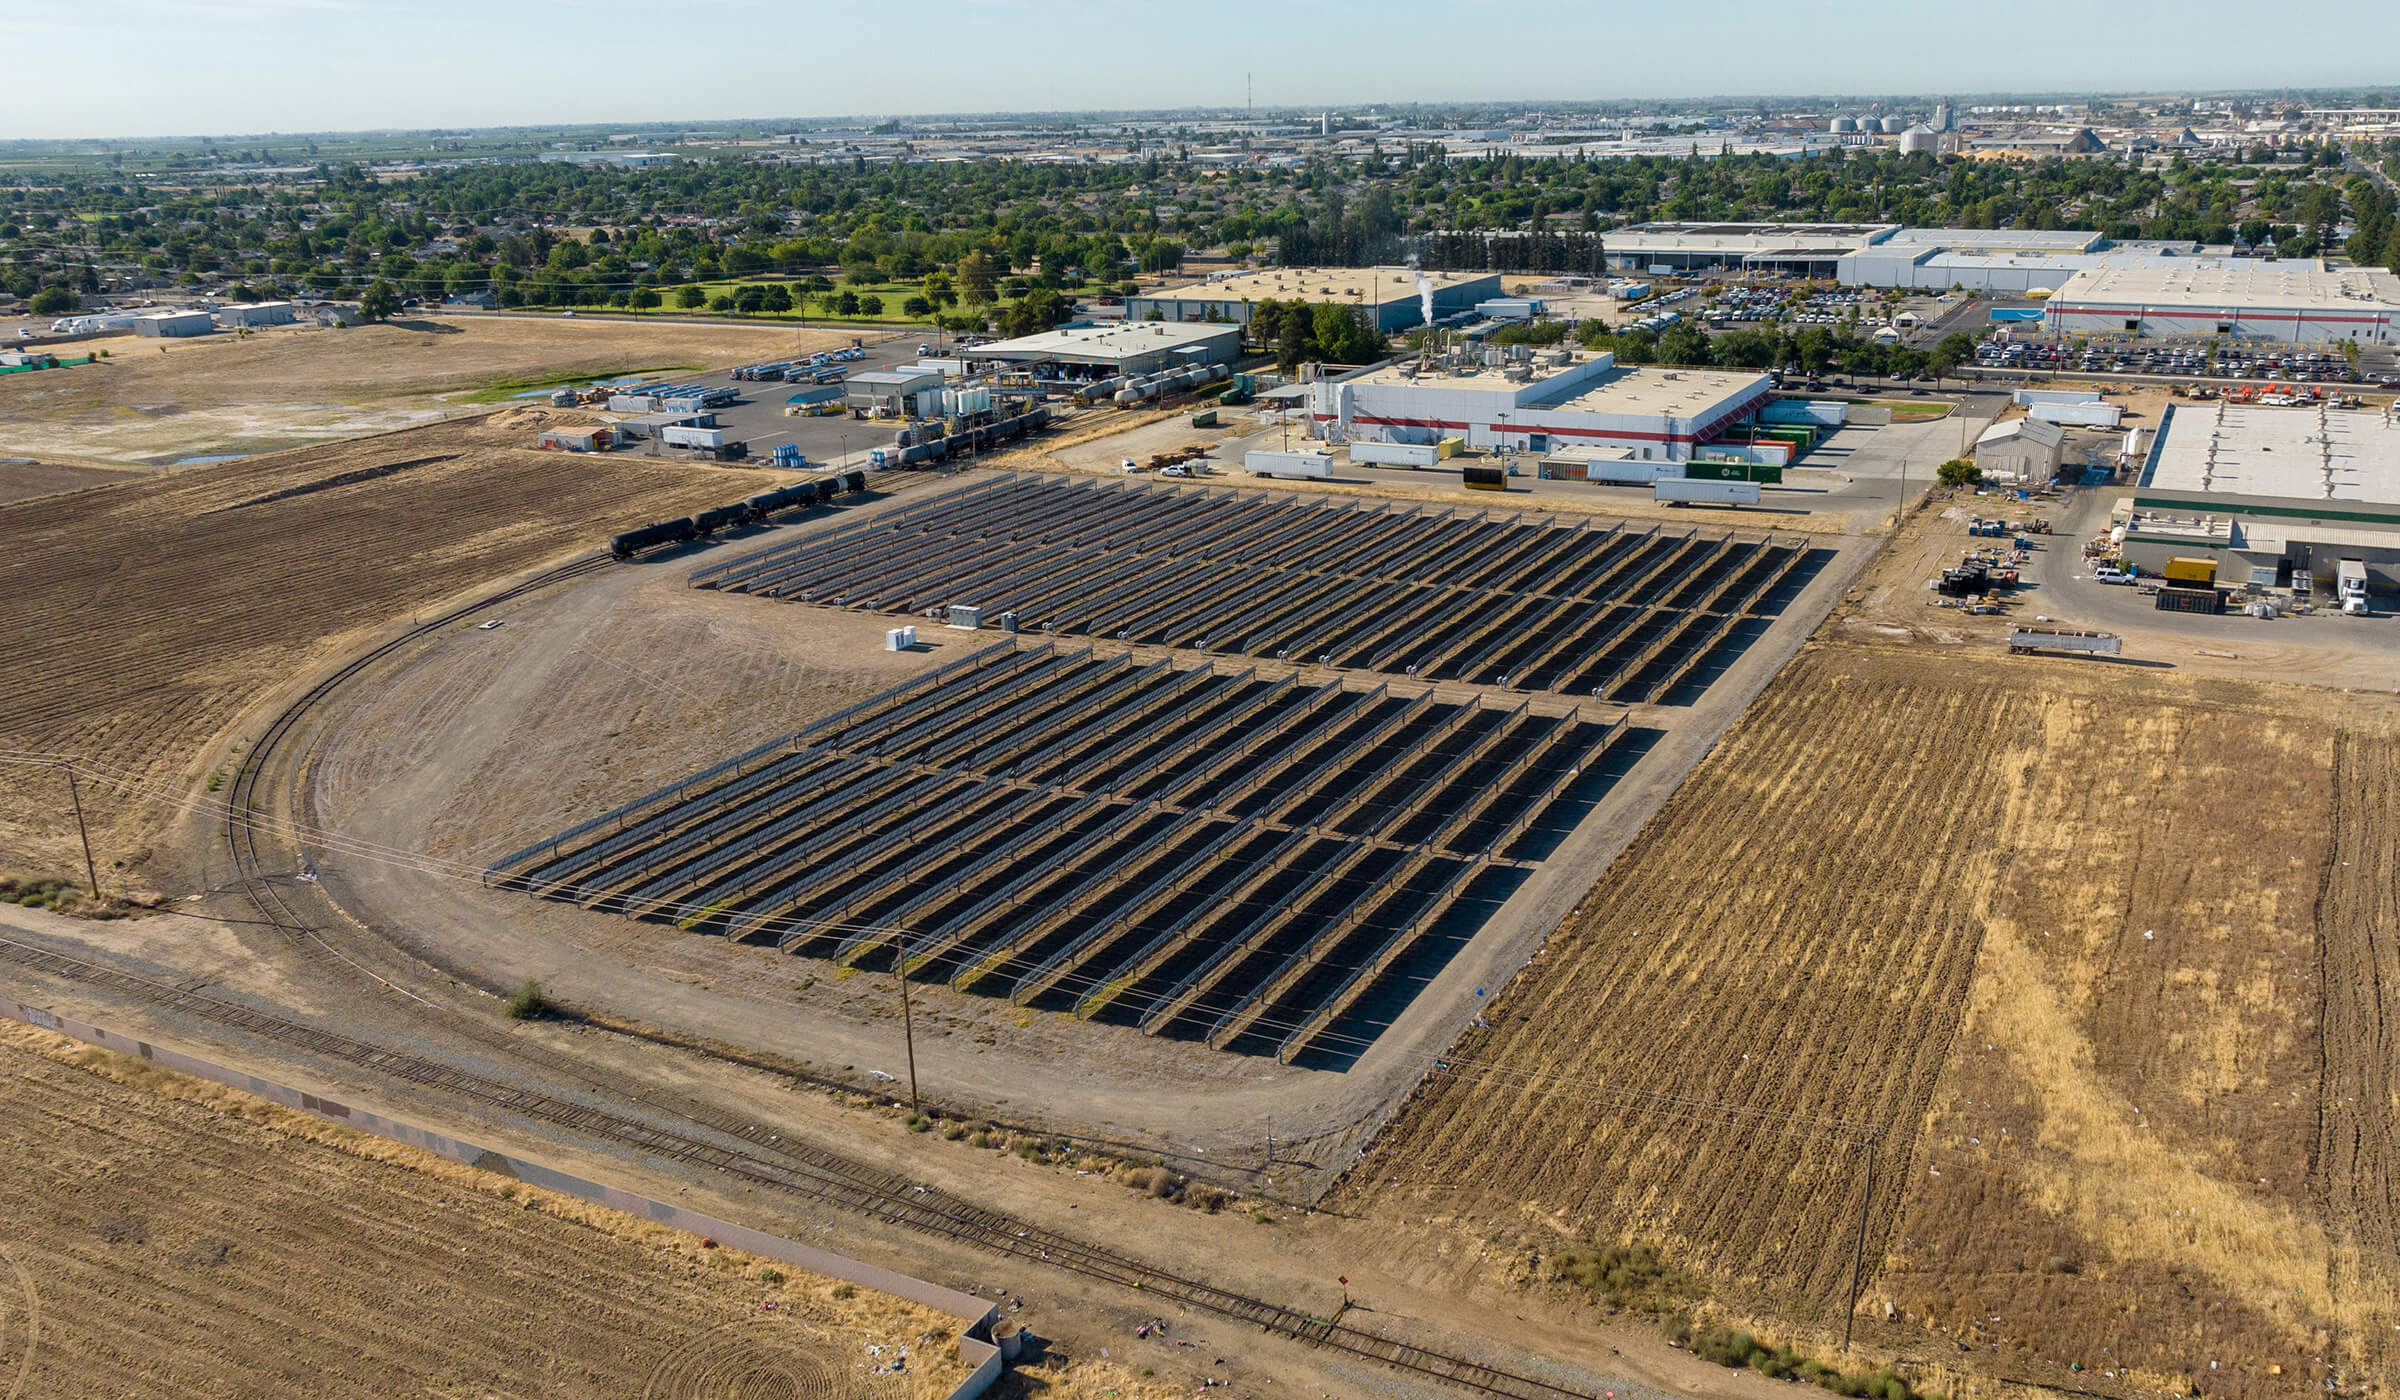 A section of the Corn Nuts® brand Solar array in Fresno, CA